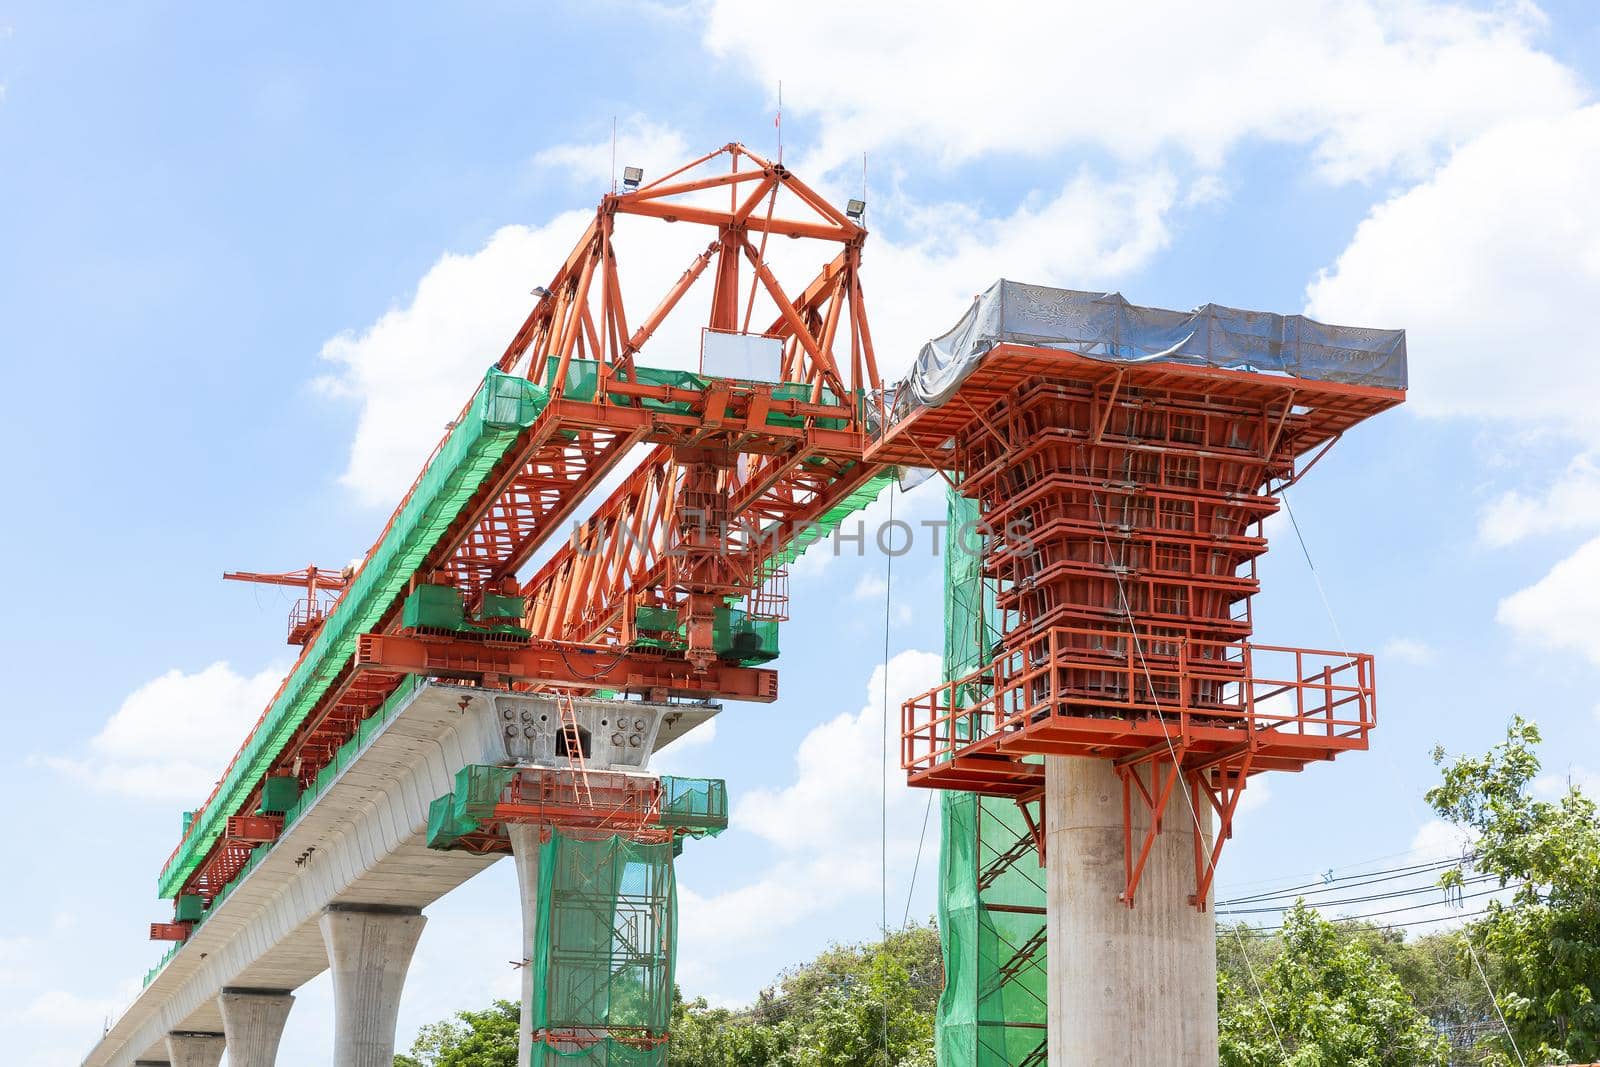 sky train elevated railway, infrastructure in city for mass transportation, under construction